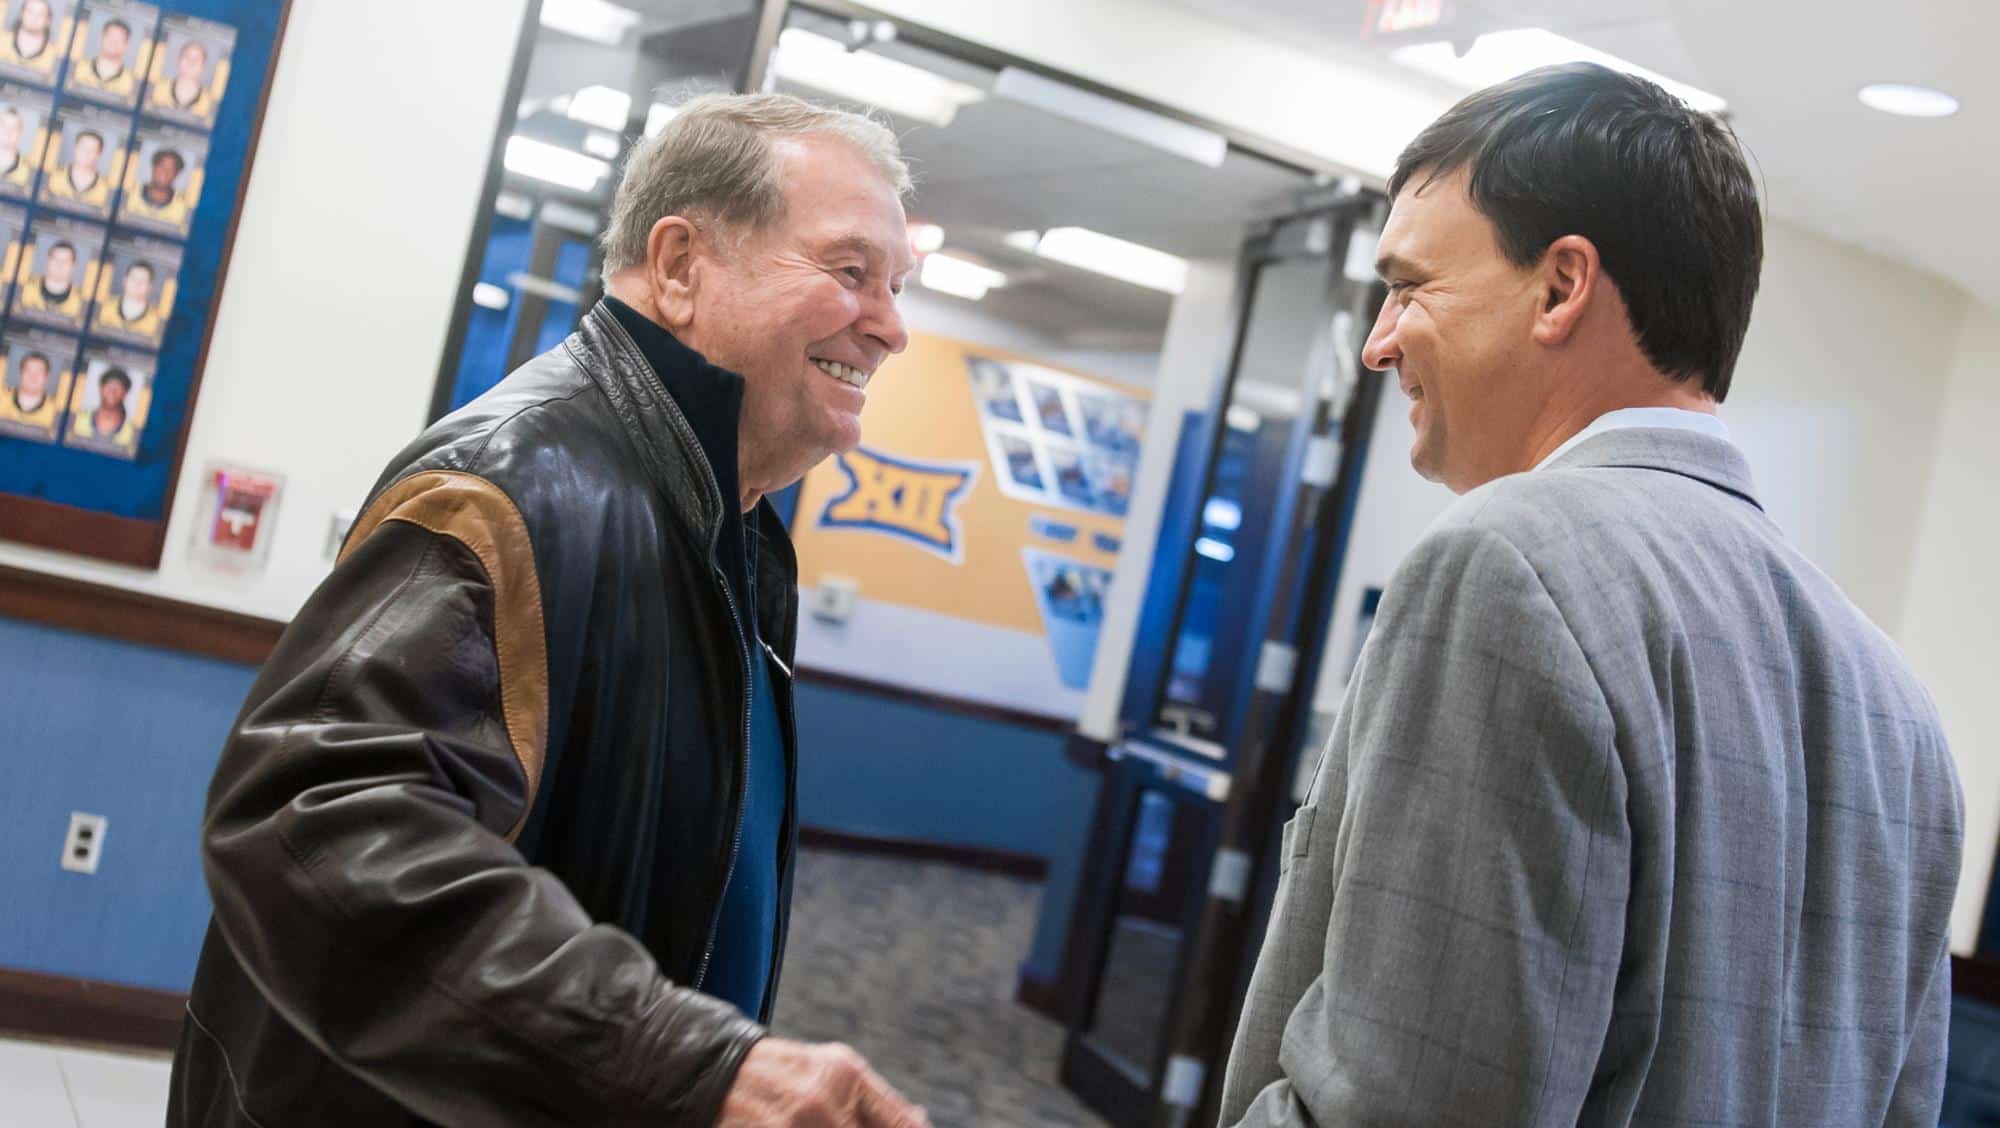 Neal Brown is Building the WVU Football Program "the Don Nehlen Way"